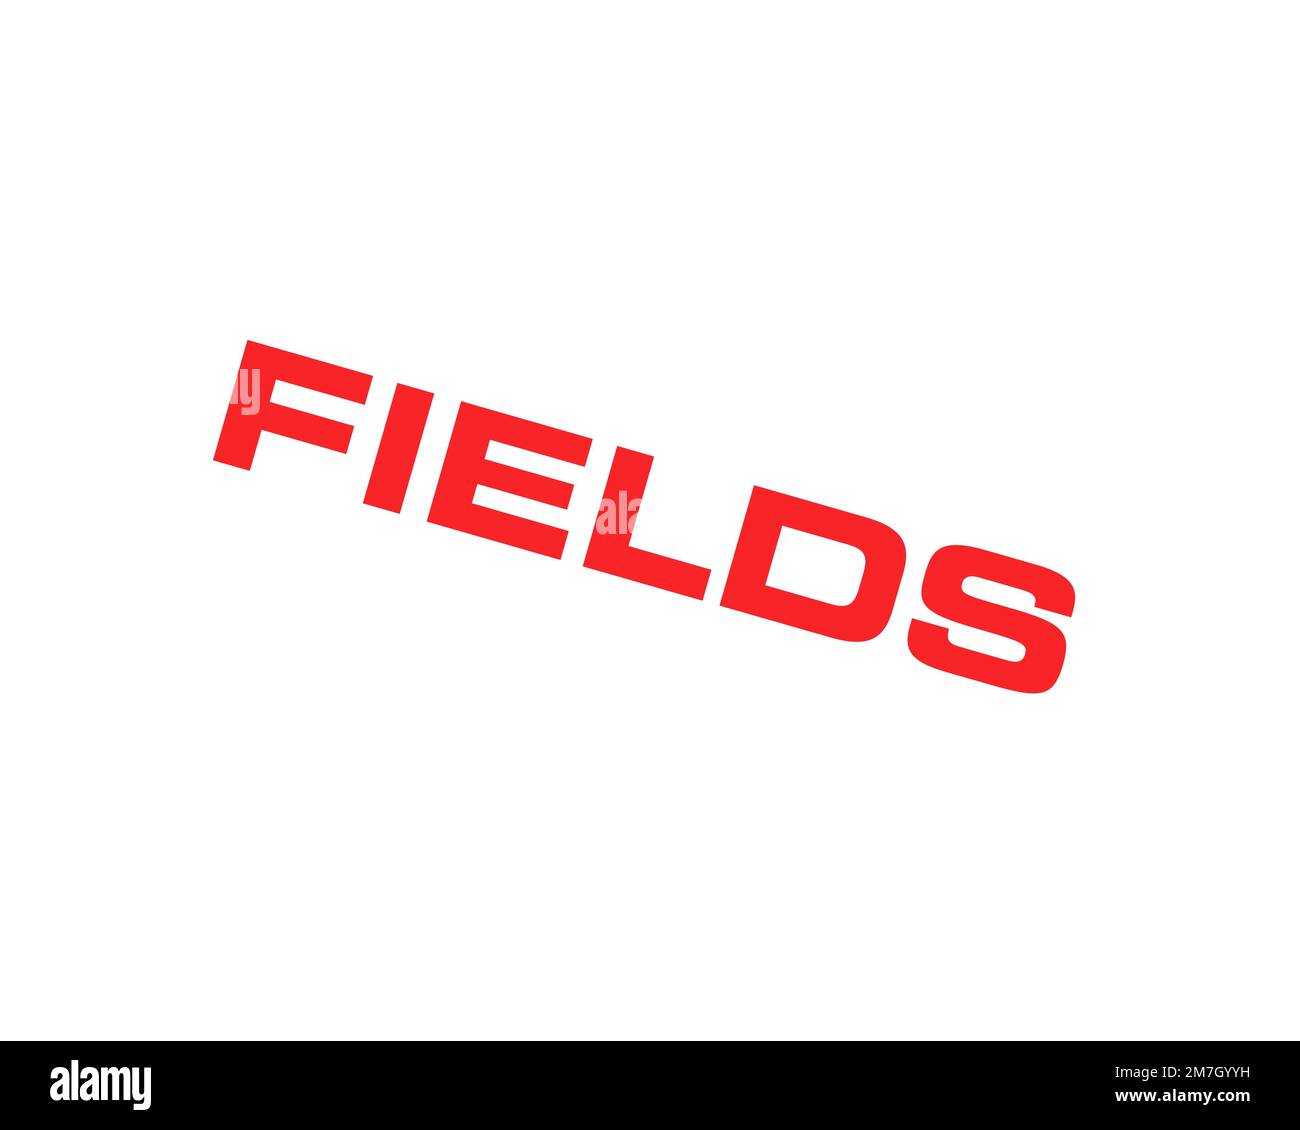 Fields department store, rotated logo, white background B Stock Photo